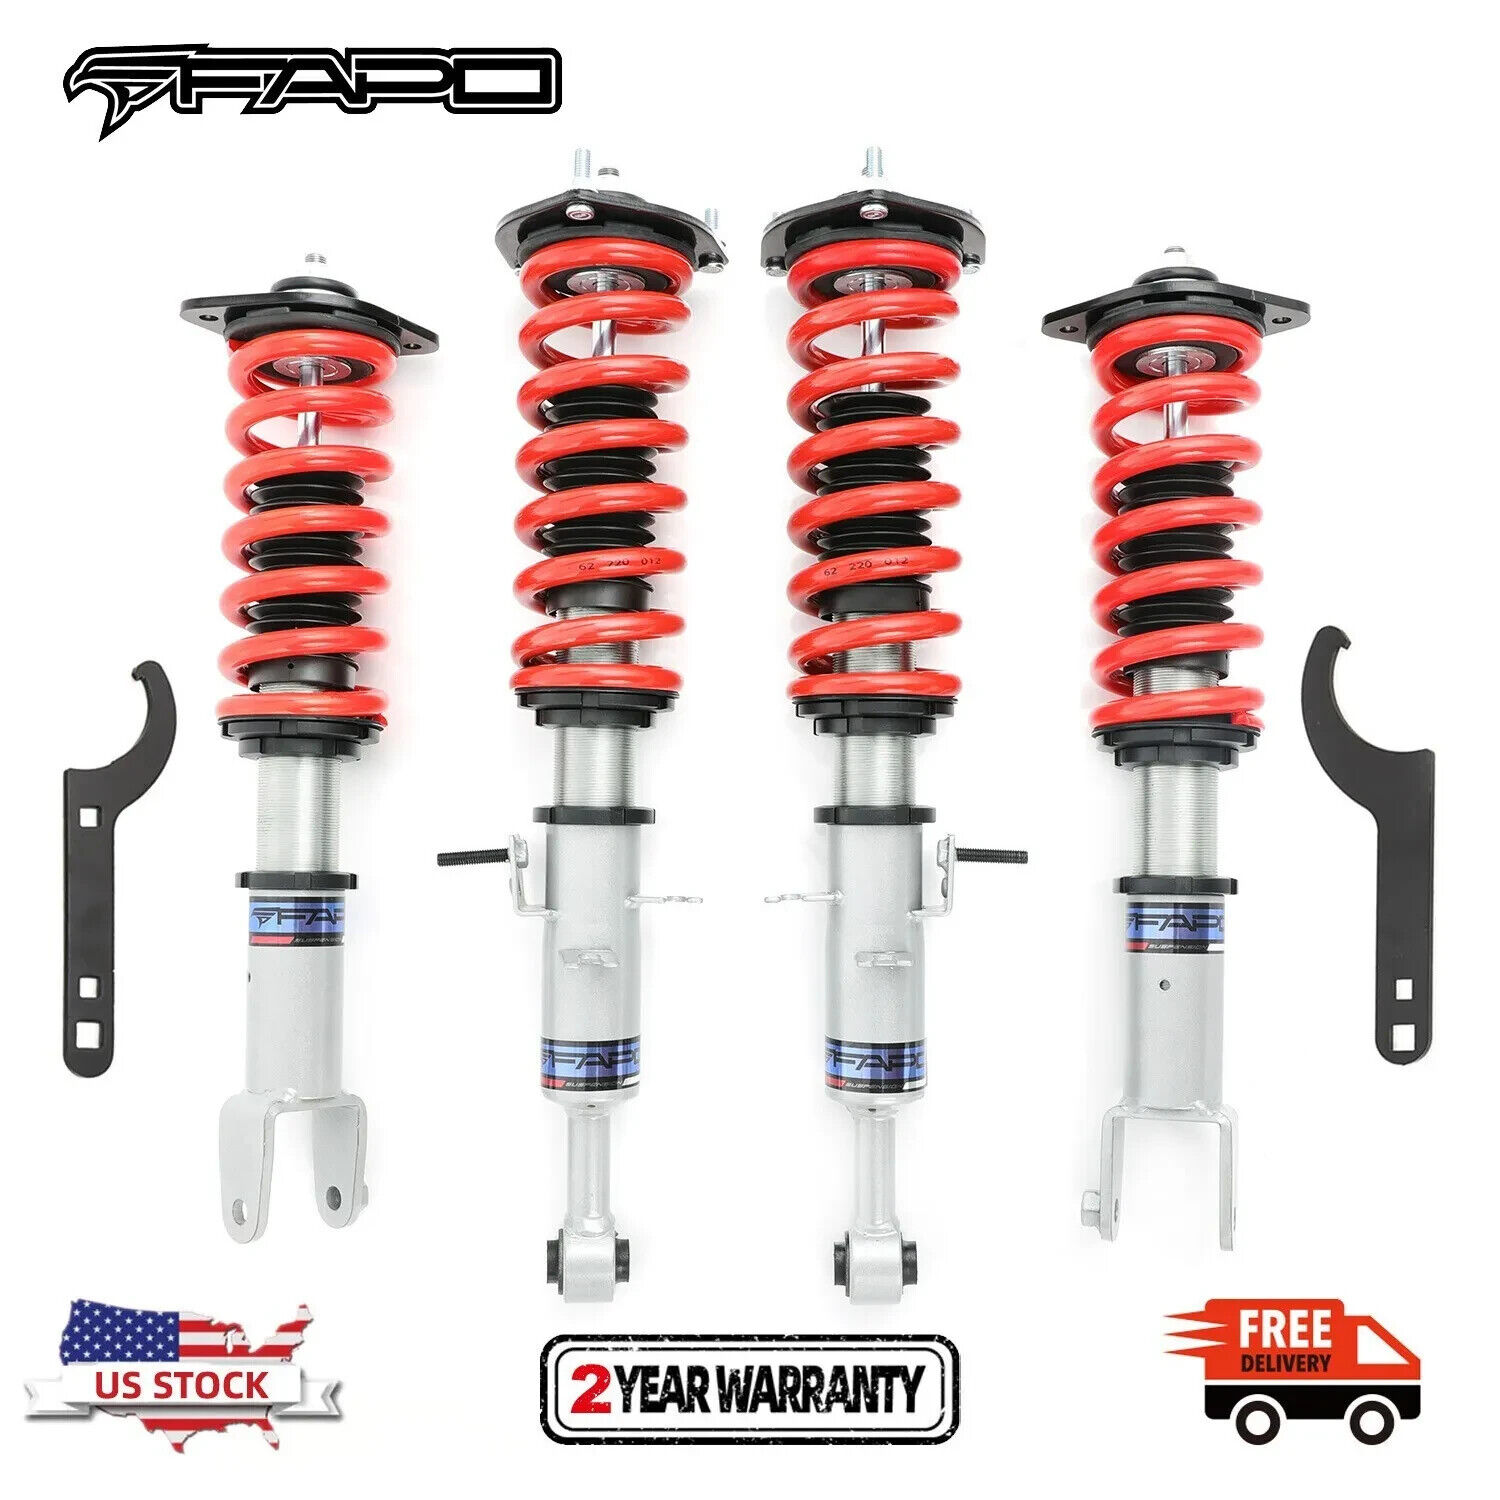 FAPO Coilover Suspension Lowering Kits For Nissan 370Z Z34 12-16 Adj height